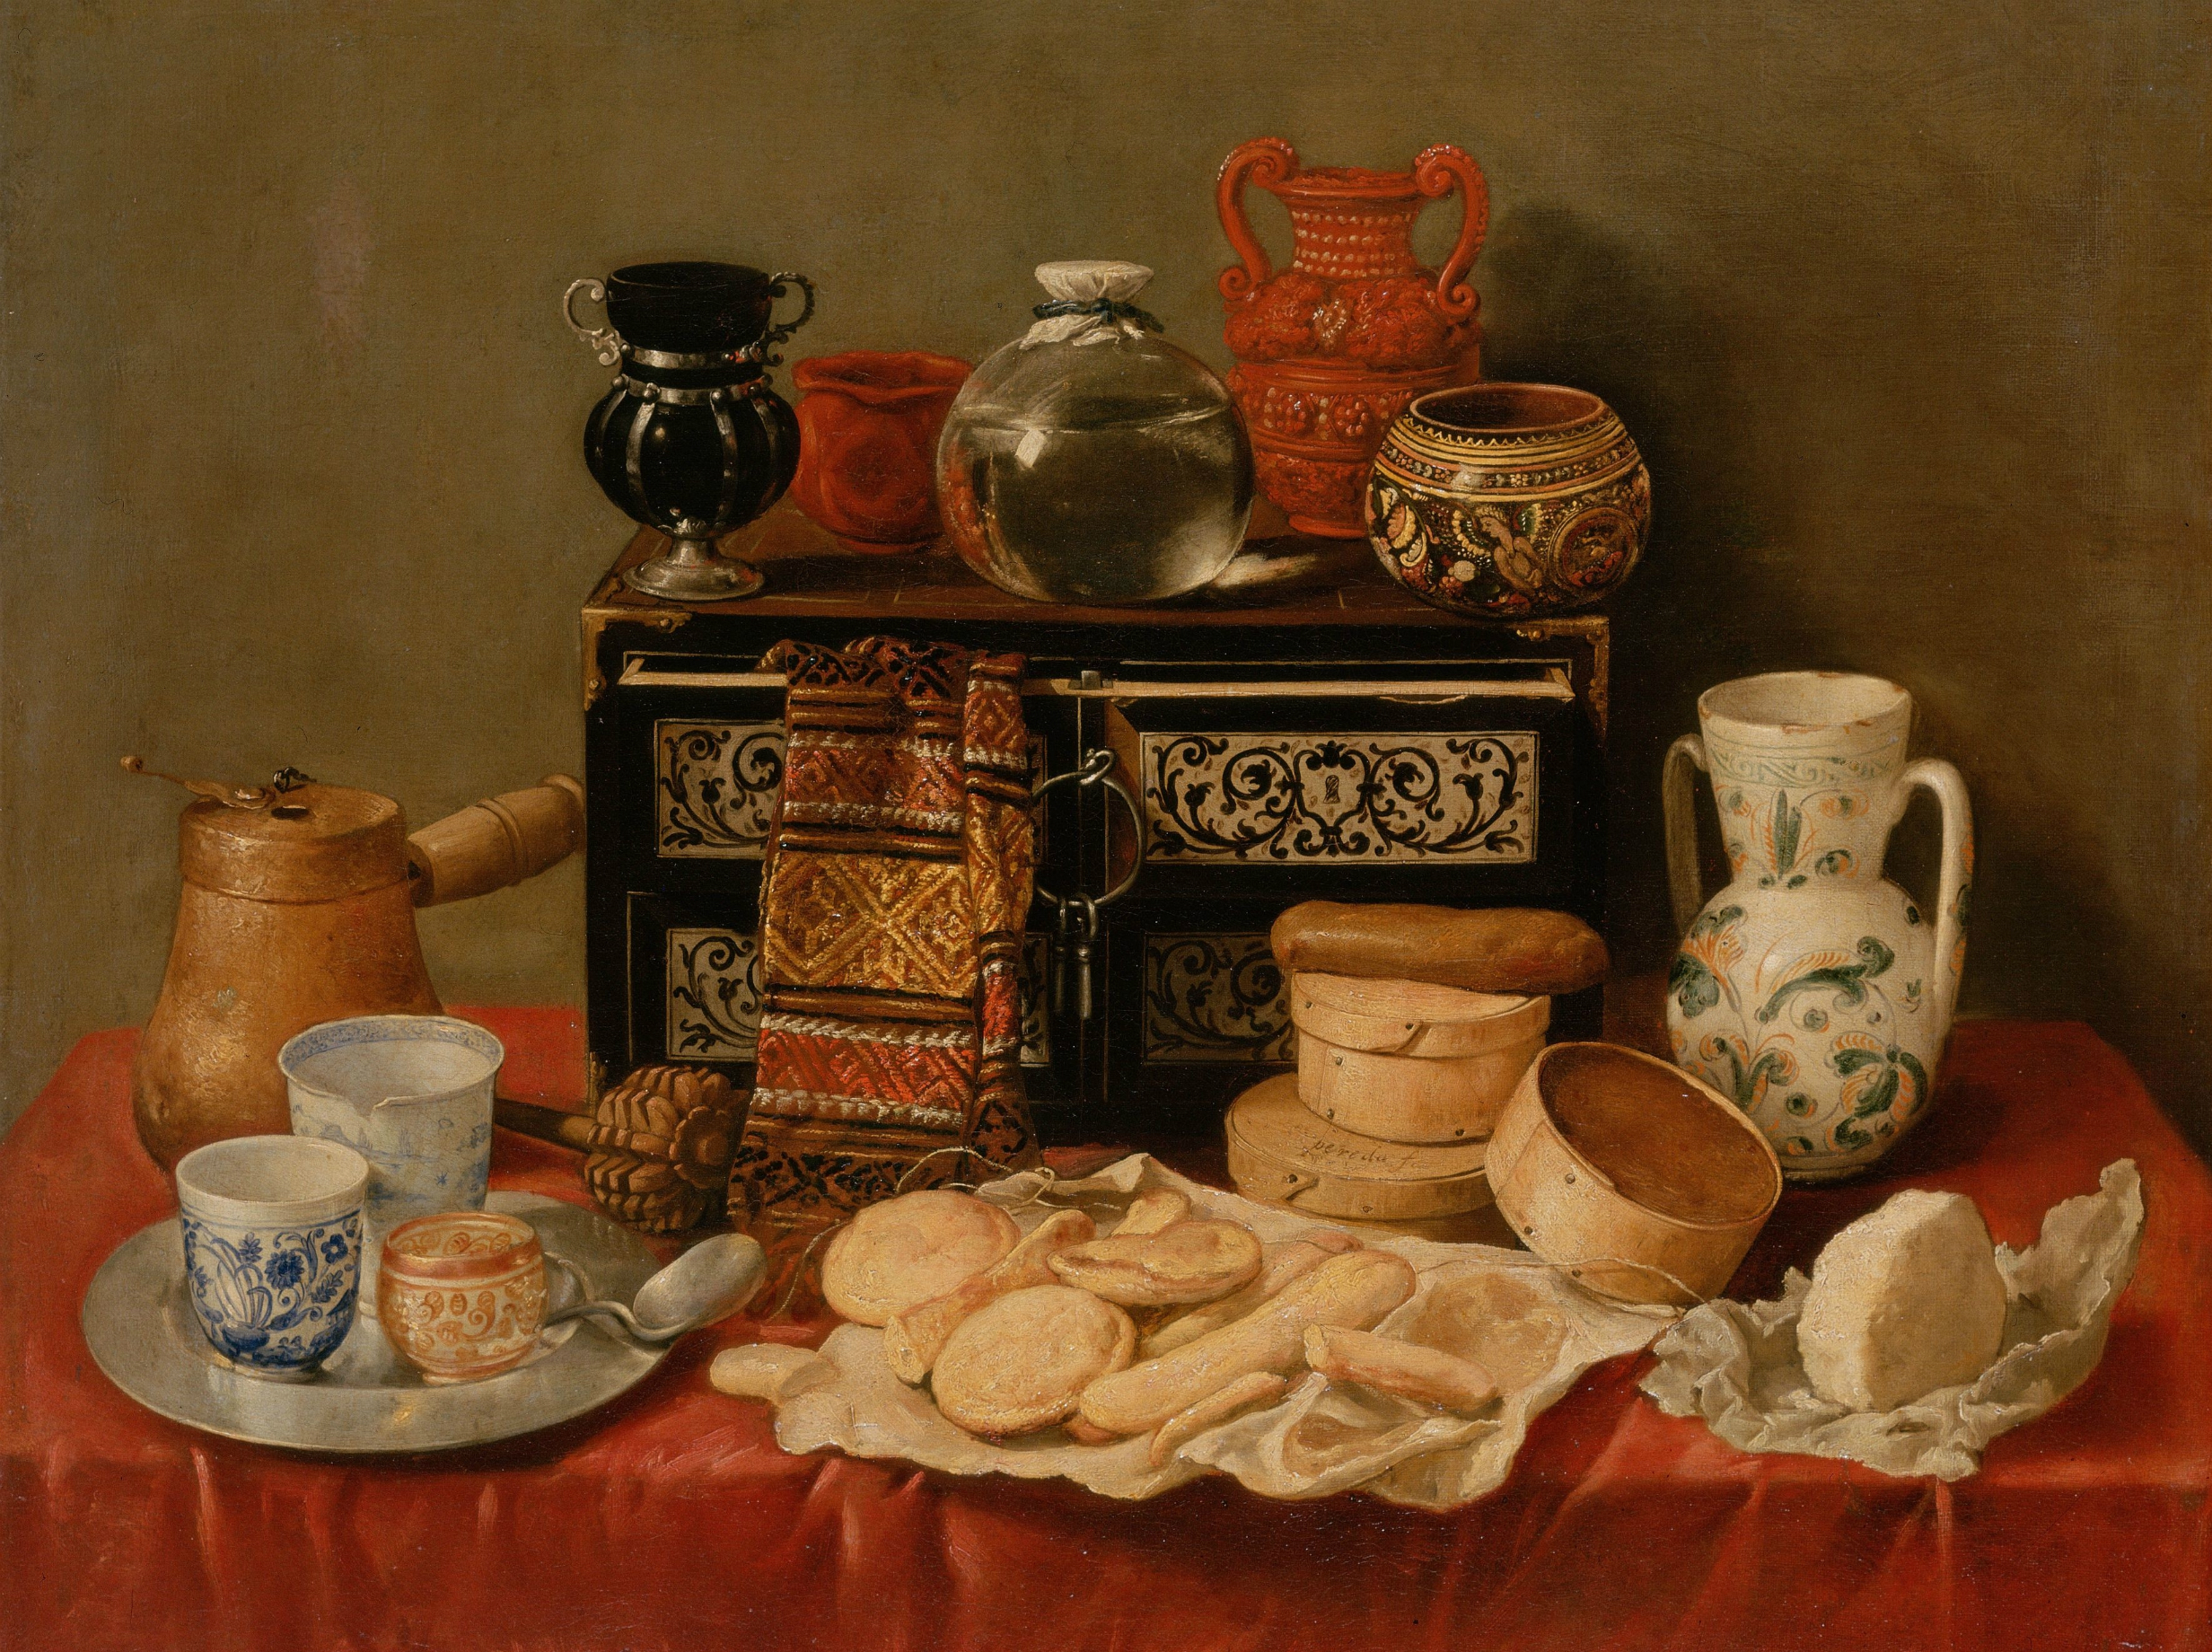 A stunning still life painting by Antonio de Pereda featuring artistic elements.